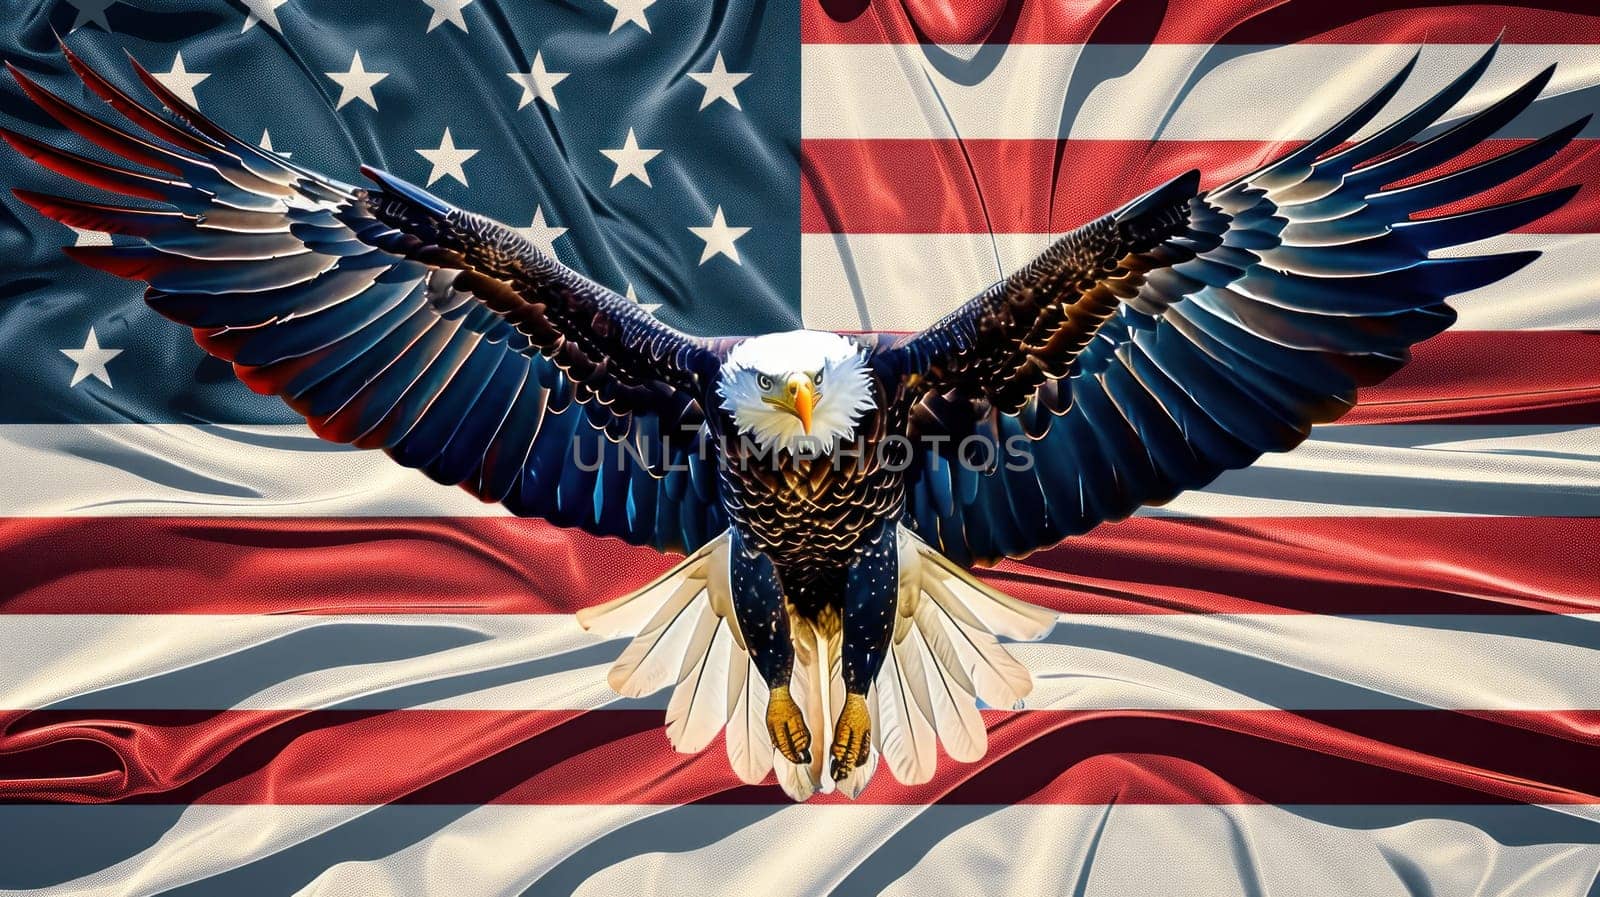 A large eagle is flying over a red, white, and blue American flag. The eagle is the main focus of the image, and it is positioned in the center of the flag. The eagle's wingspan is quite impressive